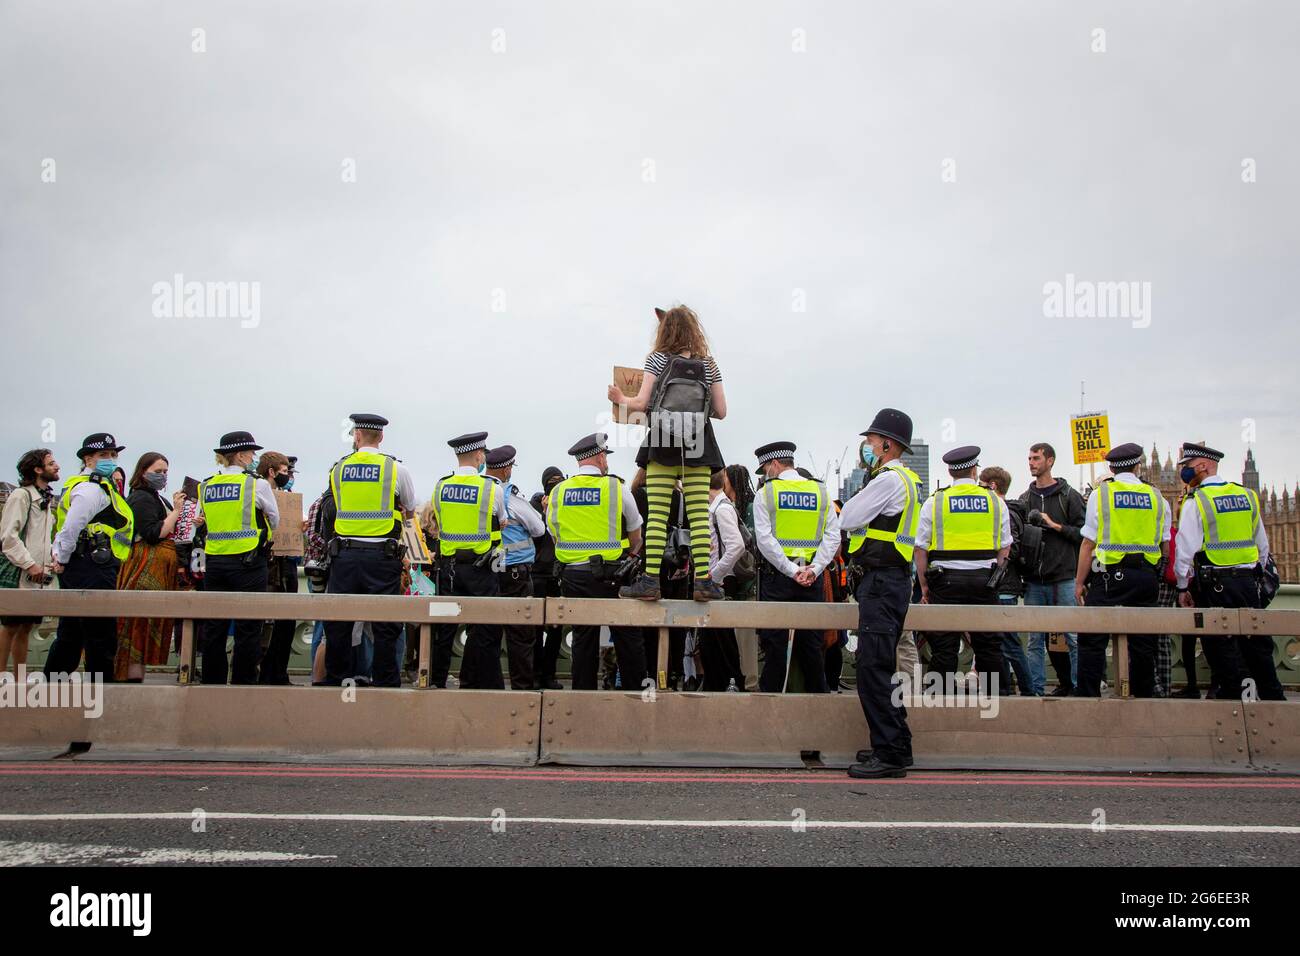 A young protester wearing cats ears and yellow glasses holds up a sign amidst the police at the 'Kill the Bill' Protest in Central London, 5.7.2021 Stock Photo